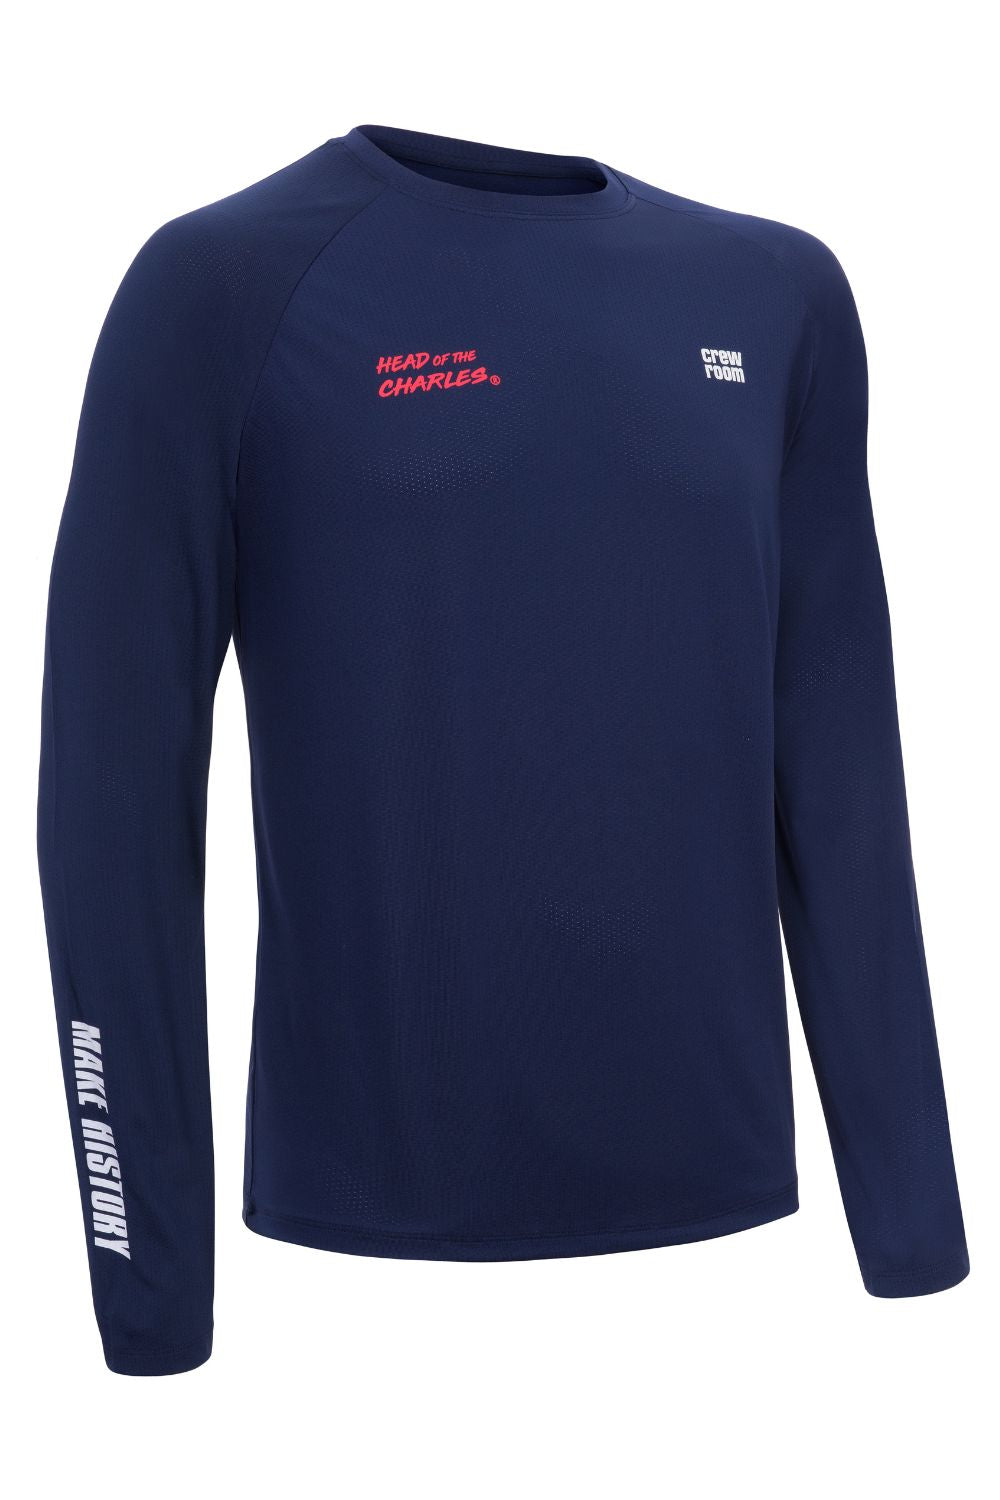 The HOCR Carbonised Bamboo Top (Men's)